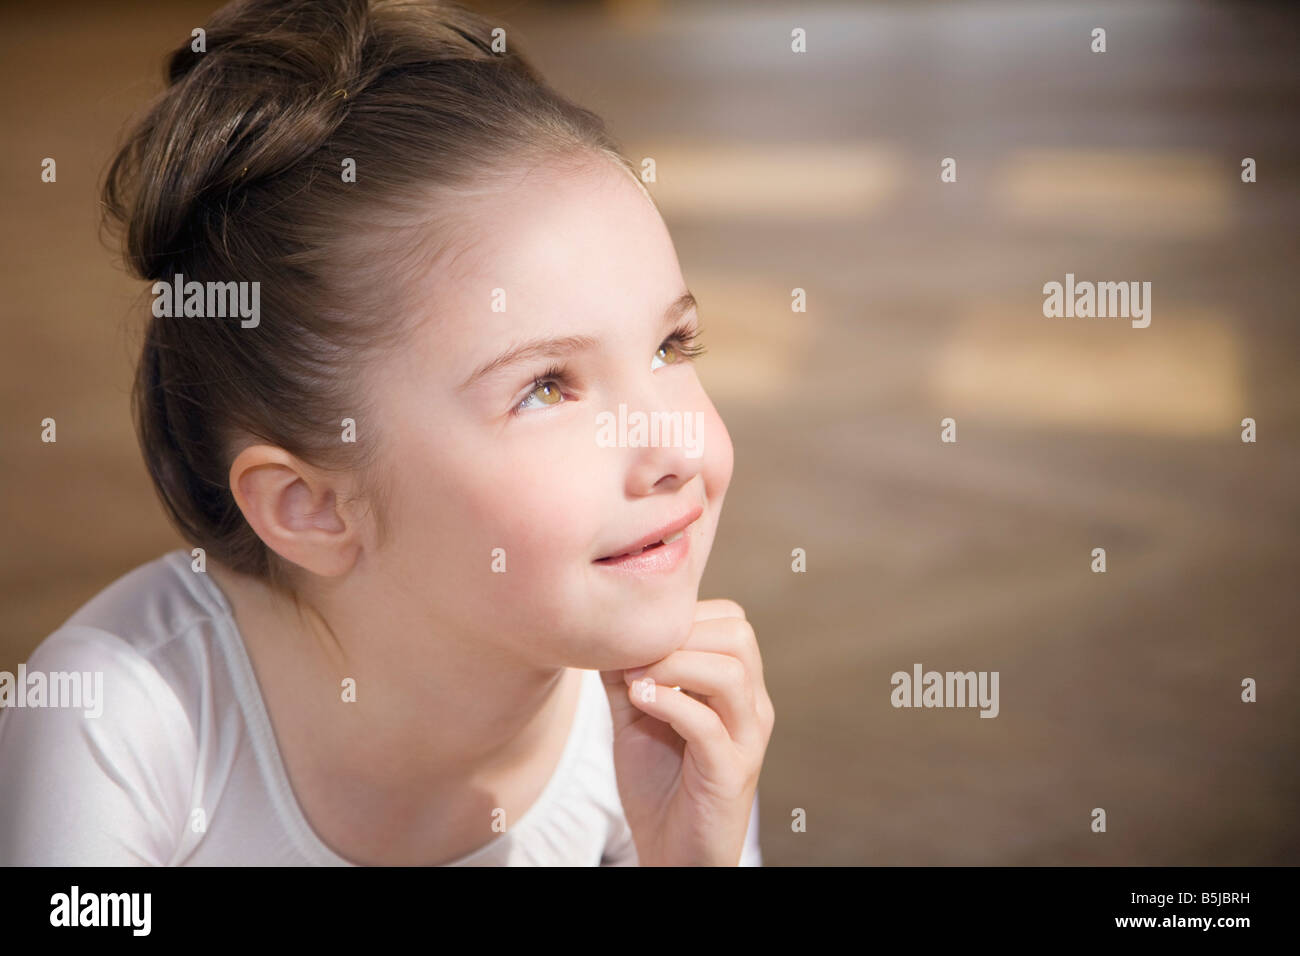 headshot of young girl in ballet dress Stock Photo